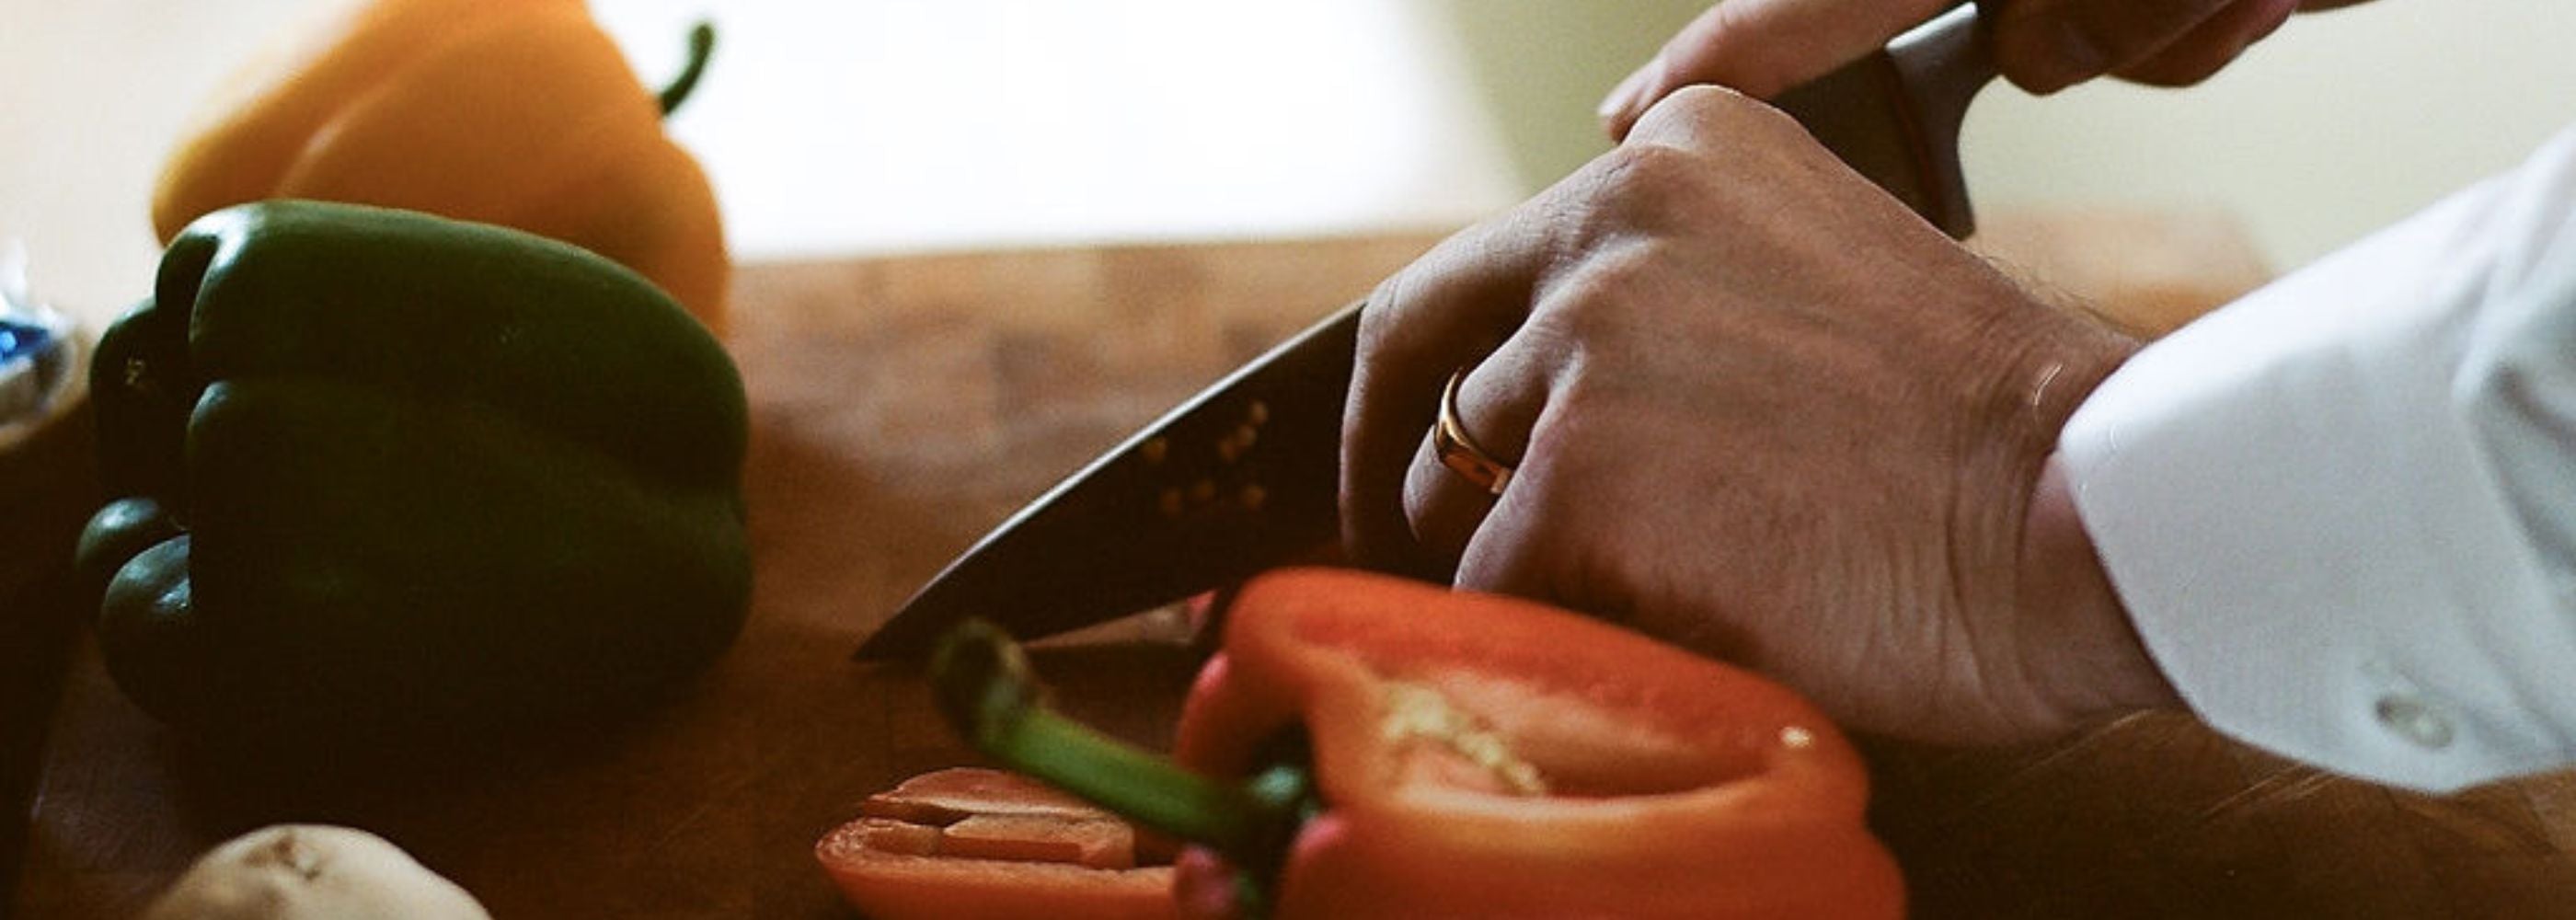   a man chop vegetables, his gold wedding ring is visible